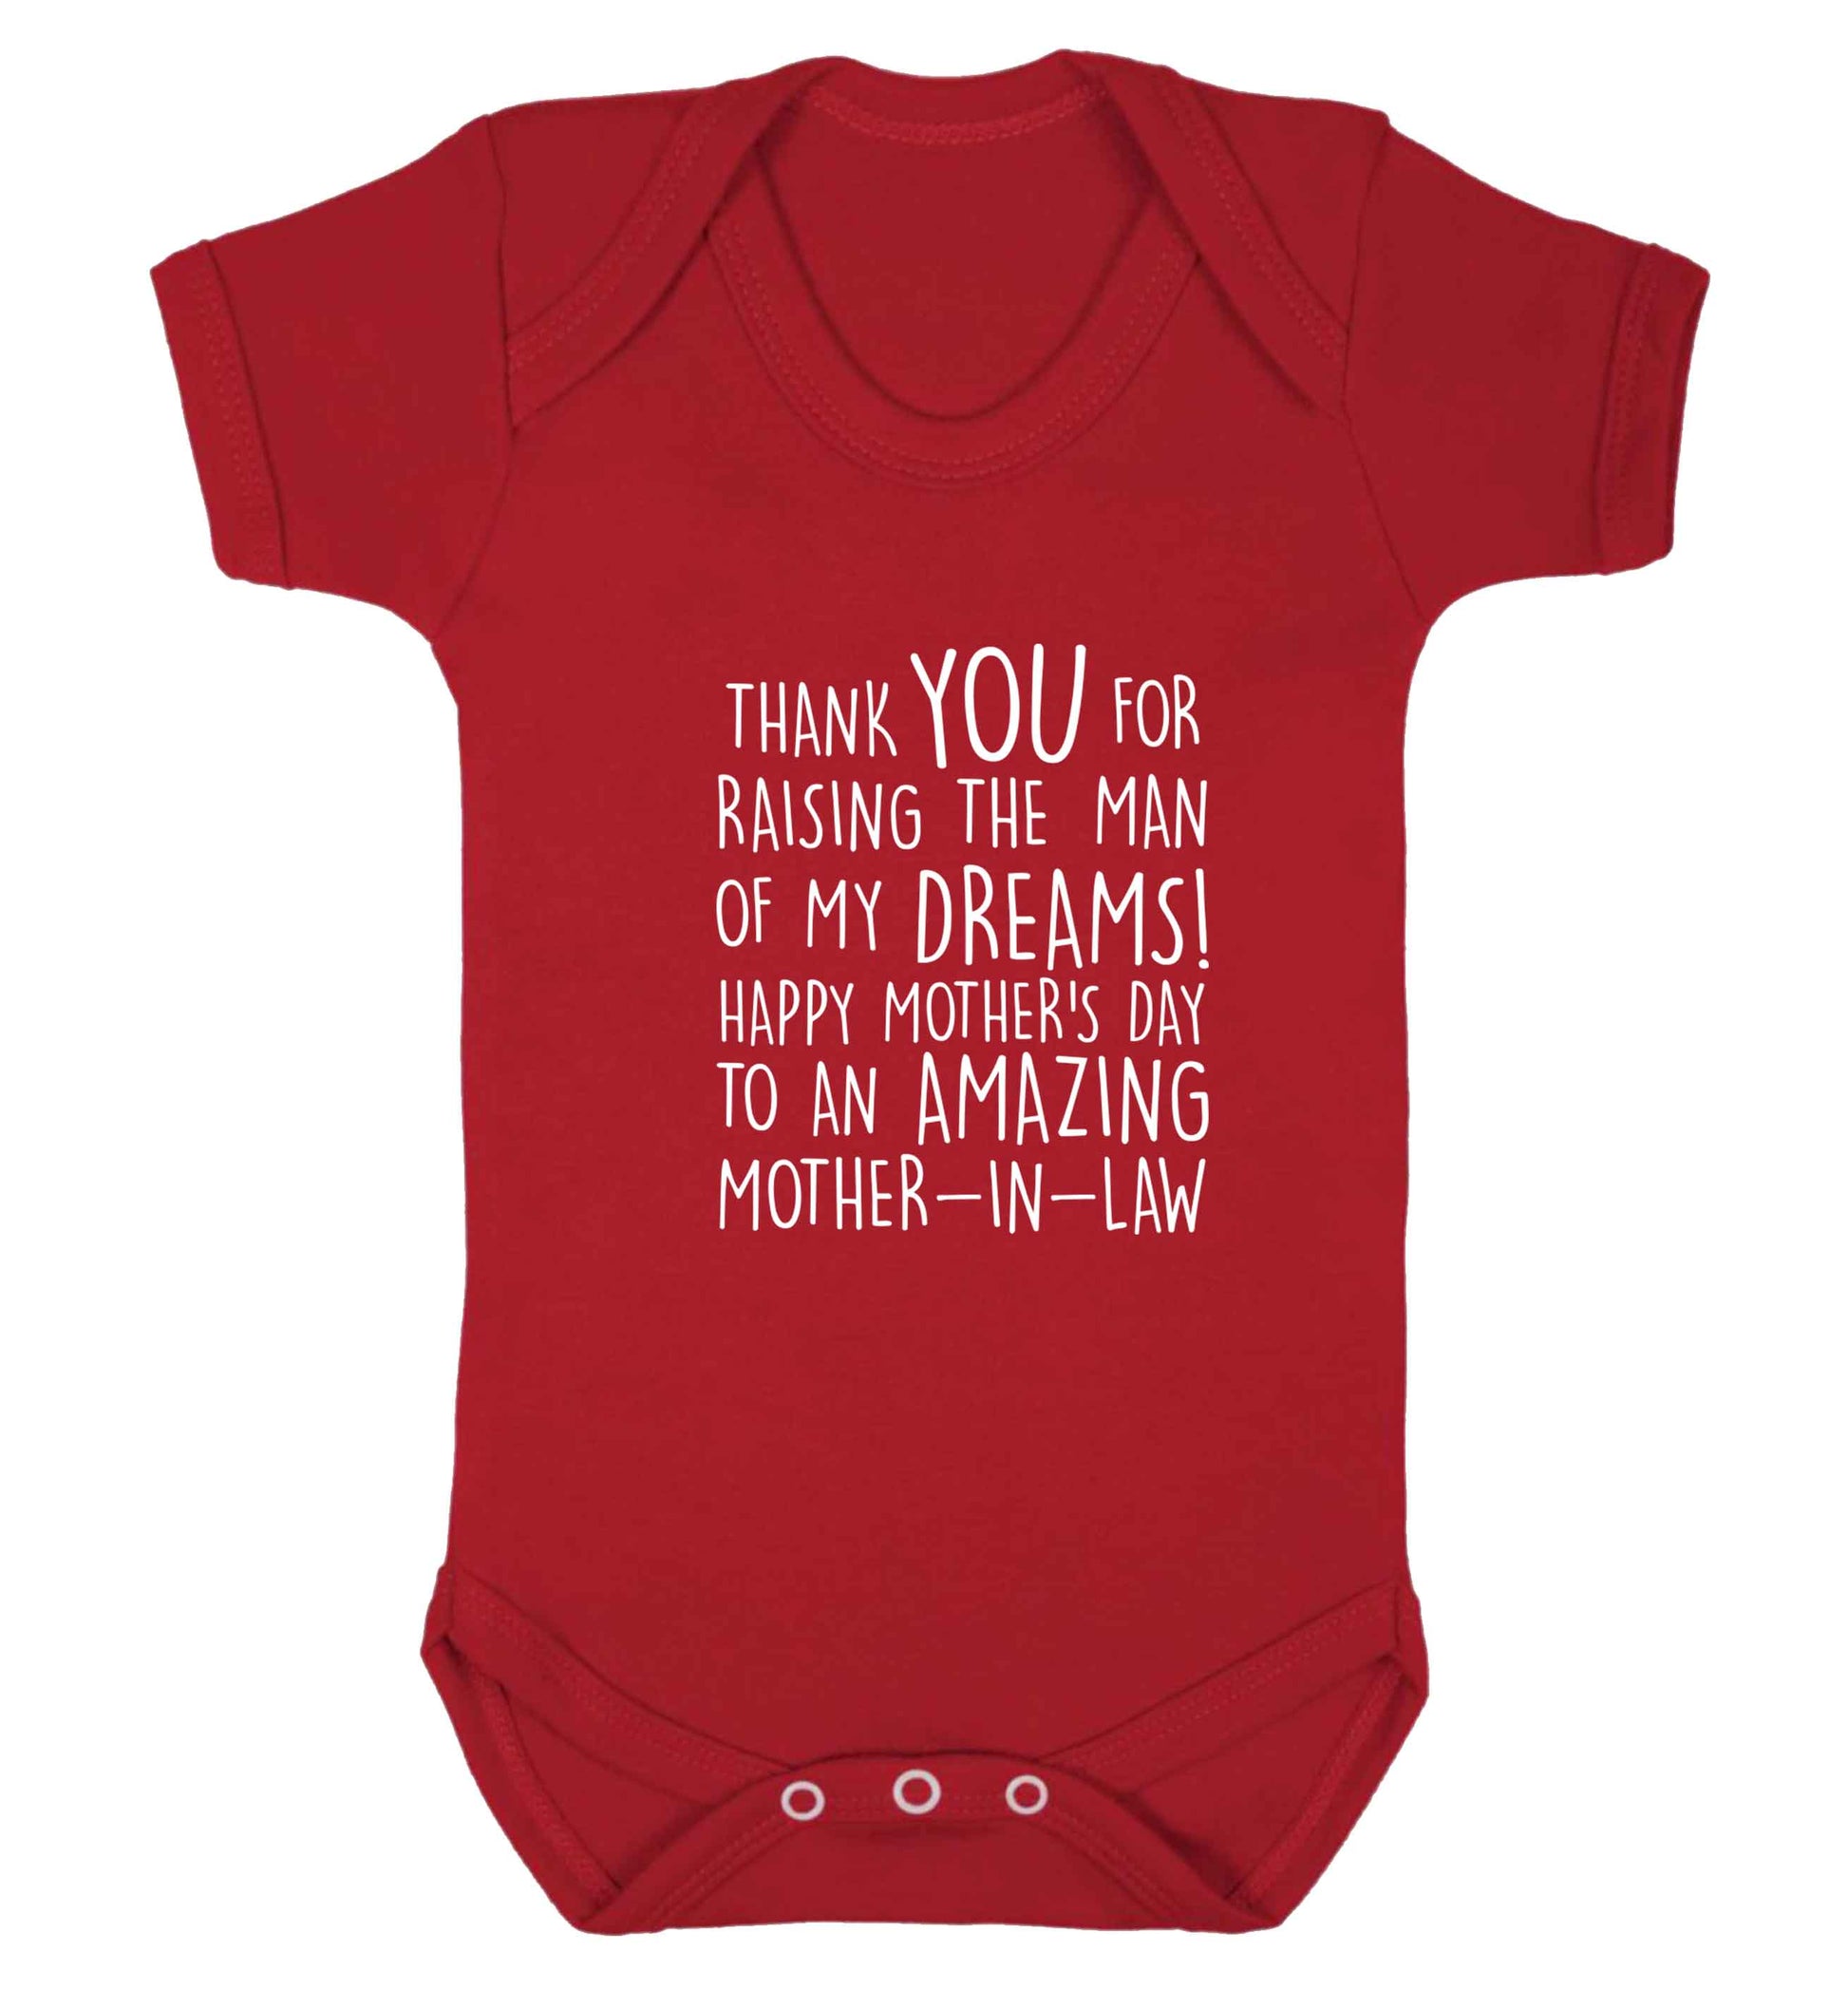 Raising the man of my dreams mother's day mother-in-law baby vest red 18-24 months